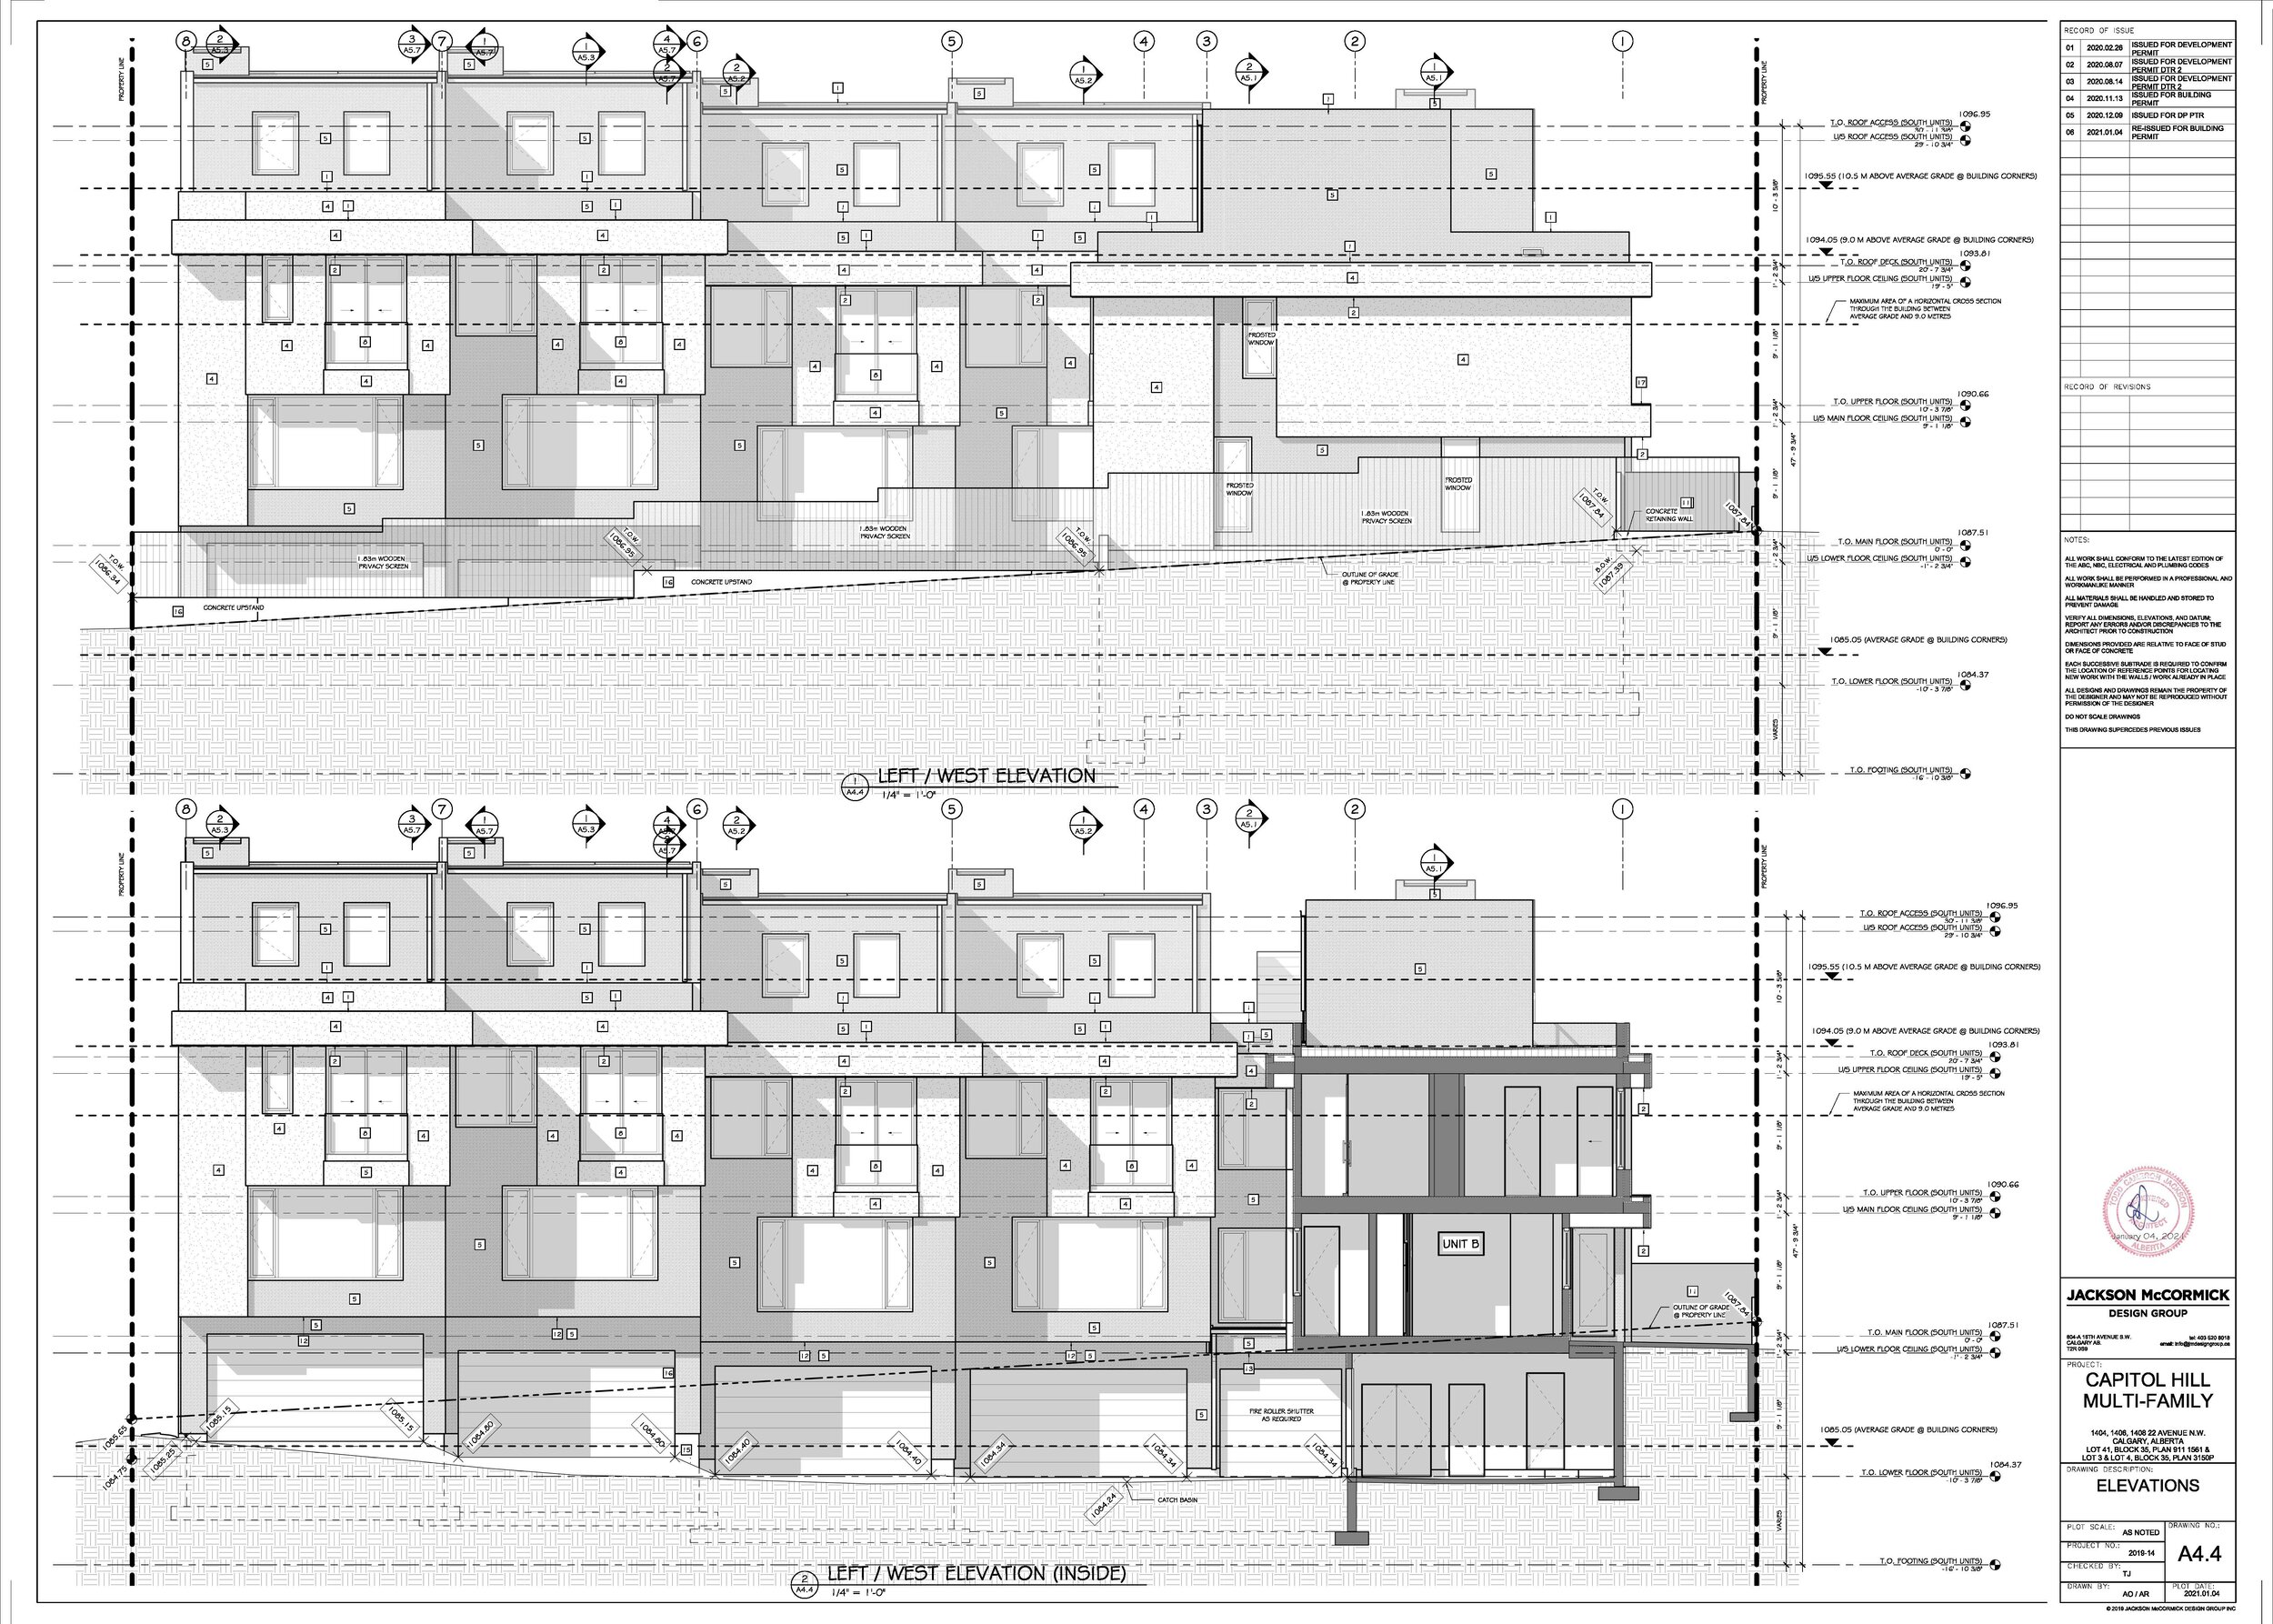 2021.01.04 - CAPITOL HILL MULTI-FAMILY - ARCH BP DRAWINGS_Page_17.jpg